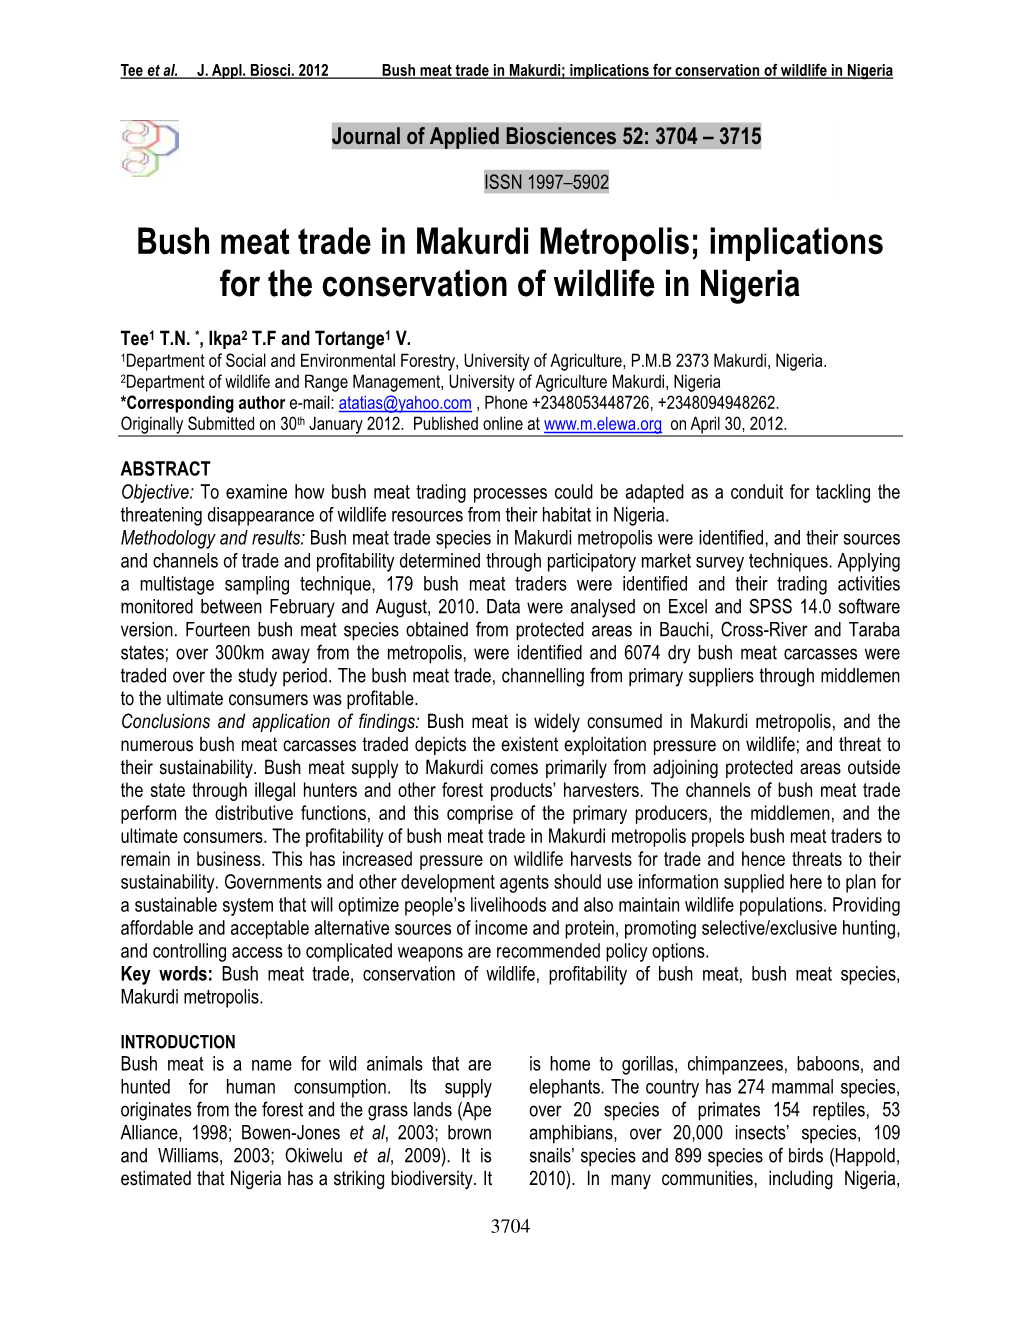 Bush Meat Trade in Makurdi Metropolis; Implications for the Conservation of Wildlife in Nigeria